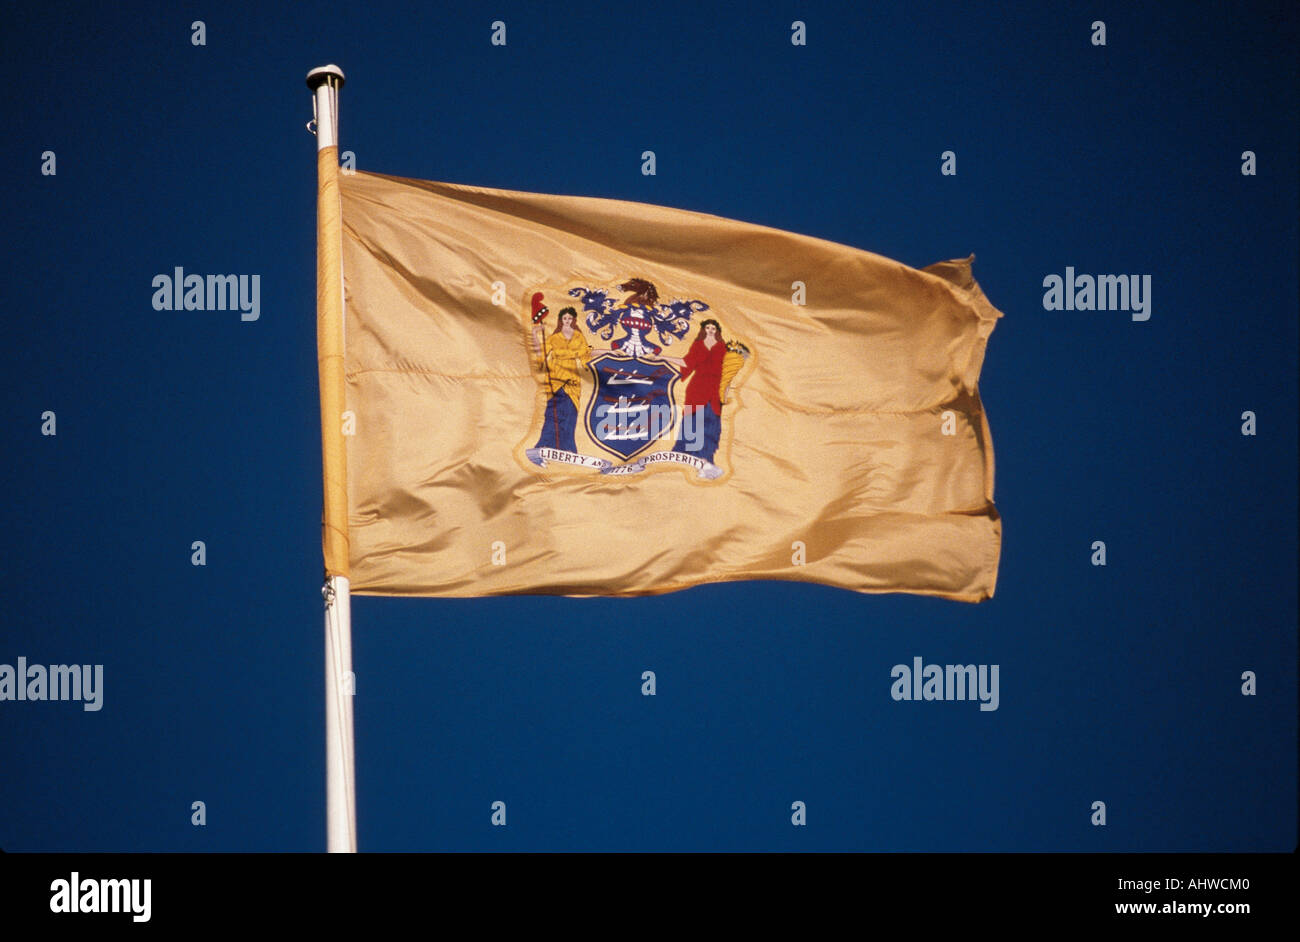 This is the New Jersey State Flag situated on a flagpole waving in the wind It s symbol is set against a yellow gold background Stock Photo